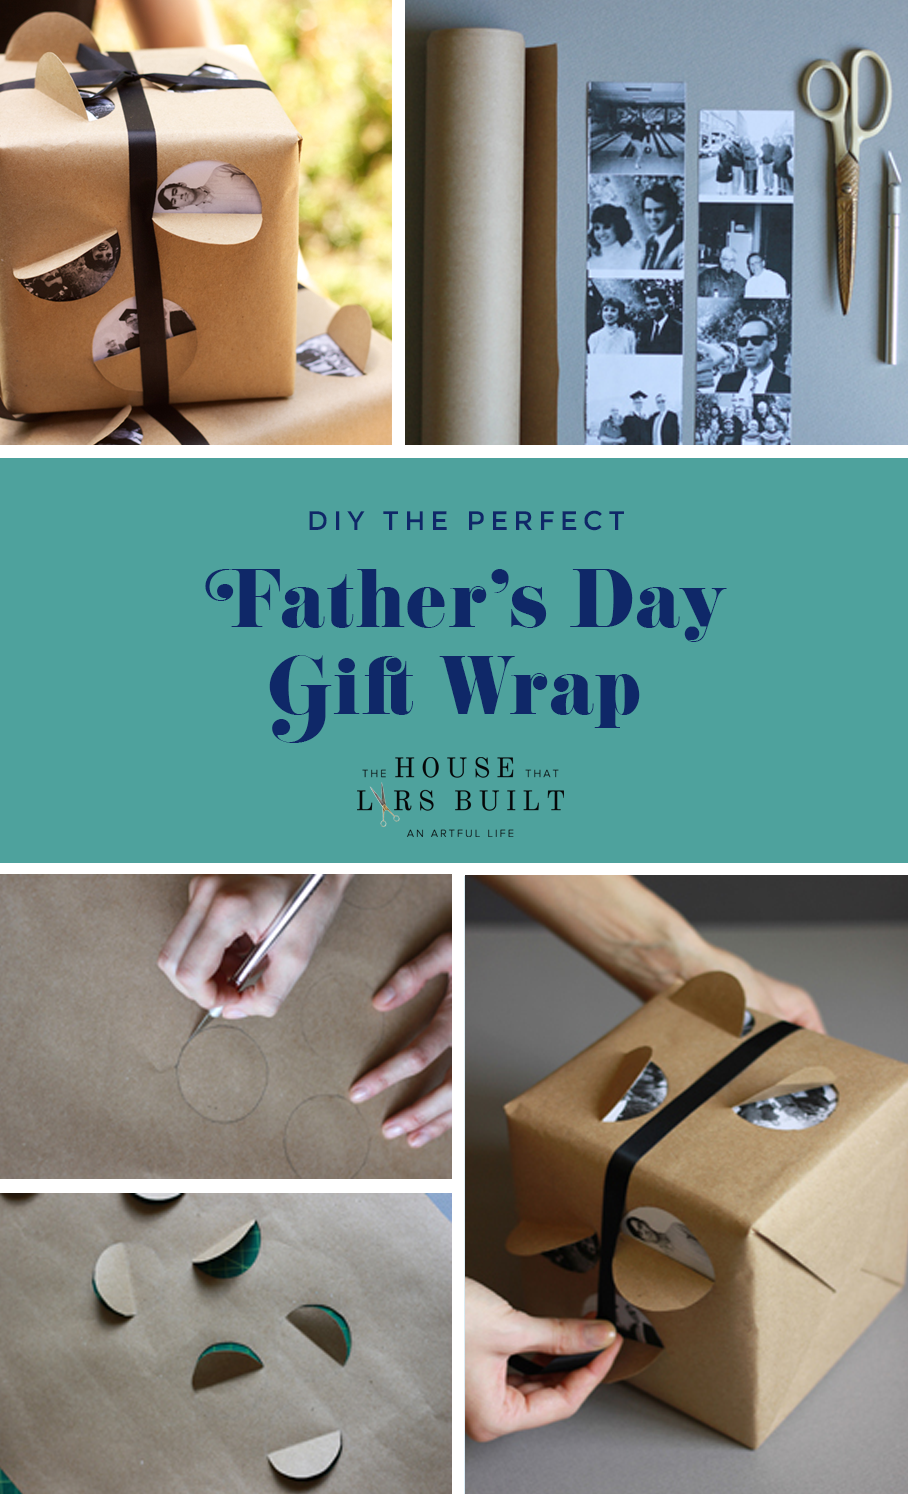 https://thehousethatlarsbuilt.com/wp-content/uploads/2013/06/DIY-Fathers-Day-Gift-Wrap-blue.png